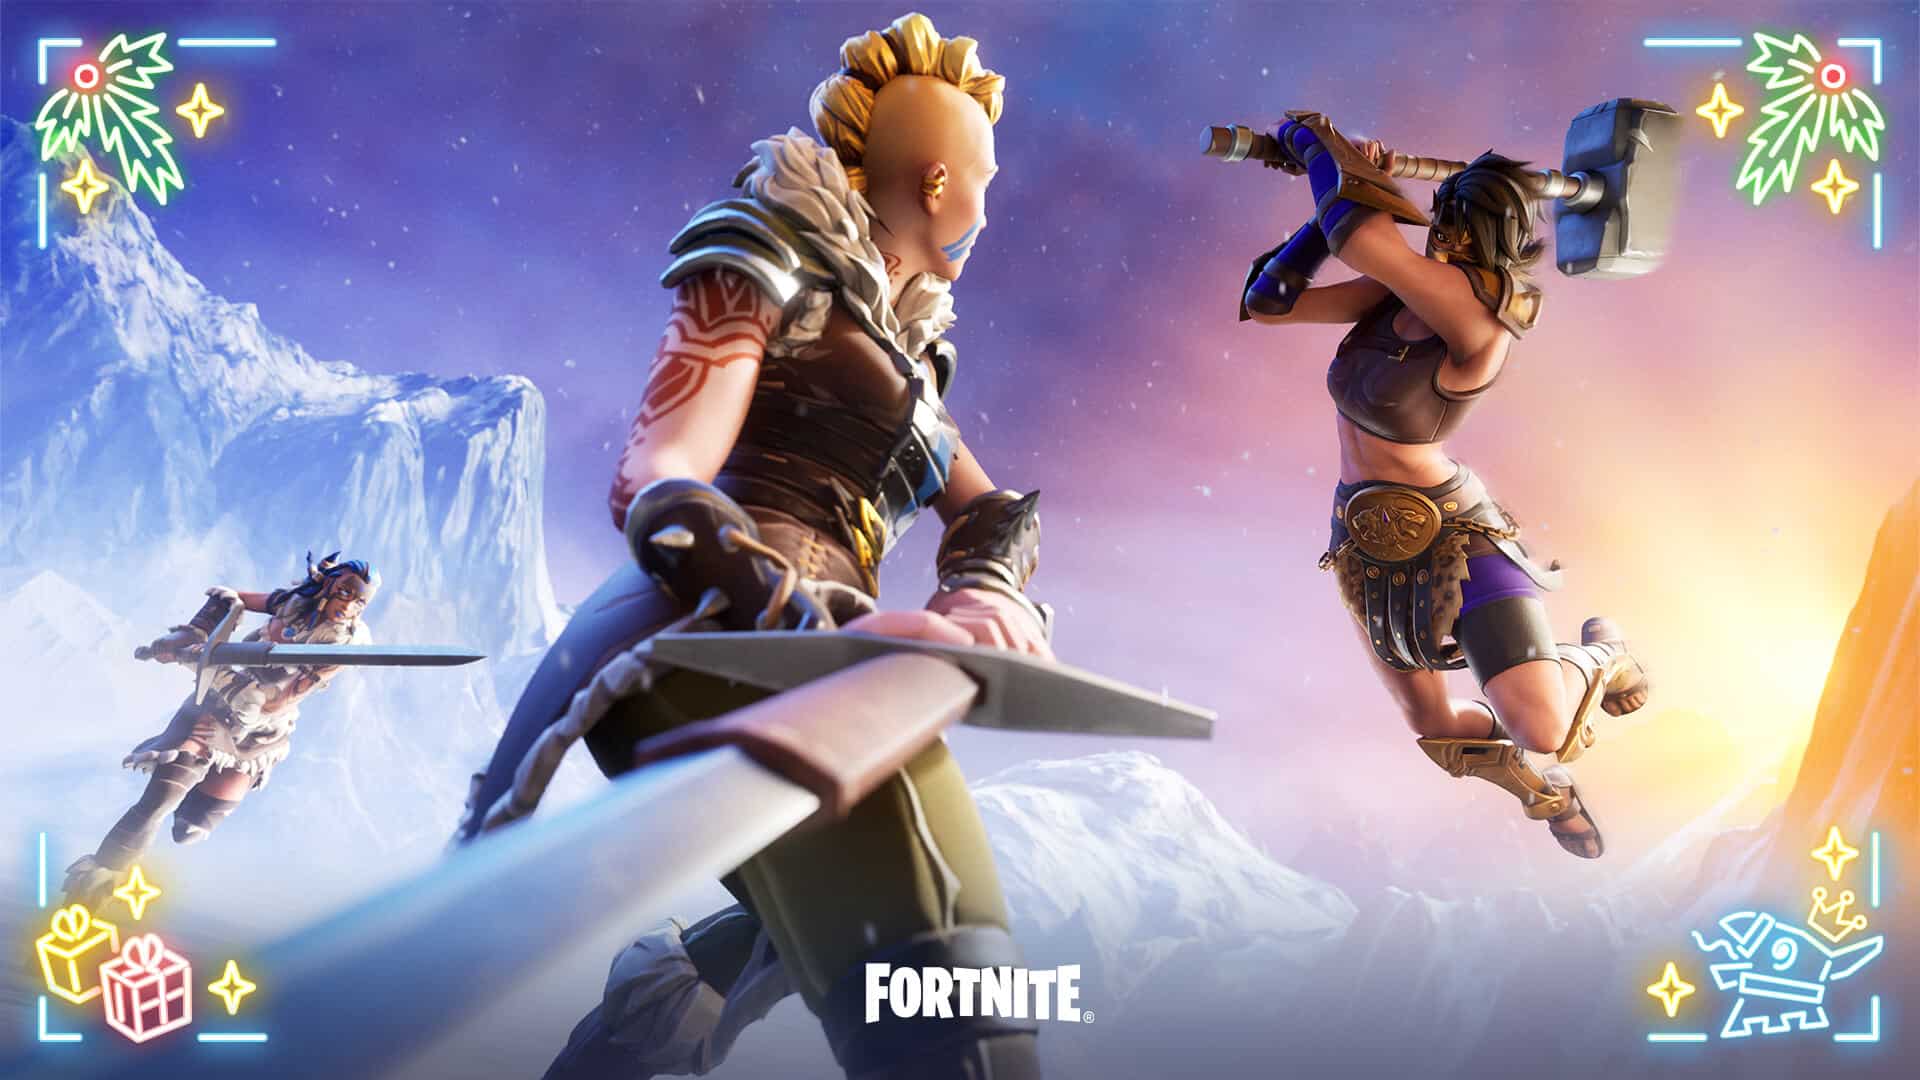 Fortnite Winterfest Presents: Which Present is the Skin